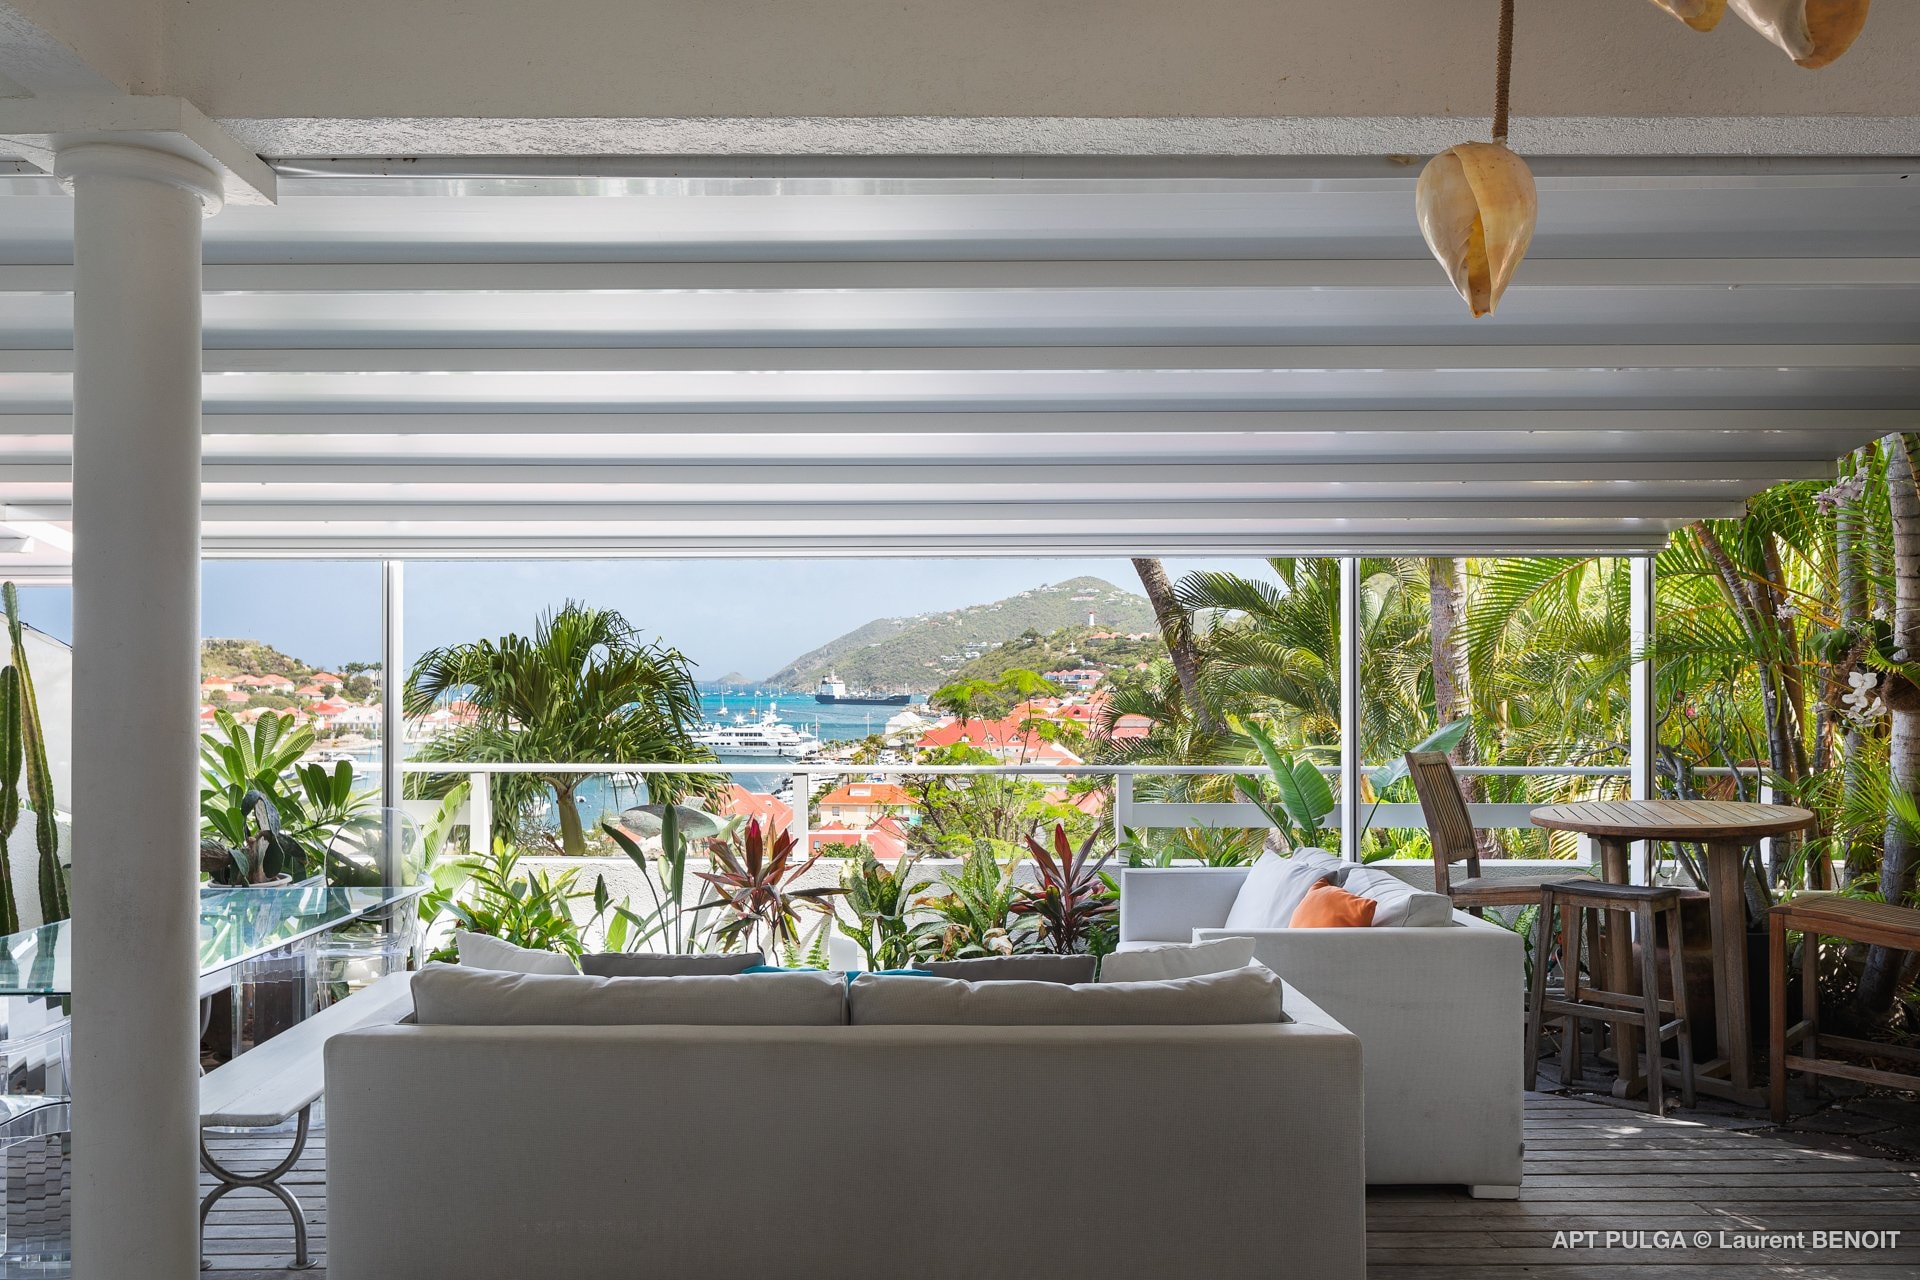 Lounge area with sofa on the covered terrace, facing the panoramic view over Gustavia. 